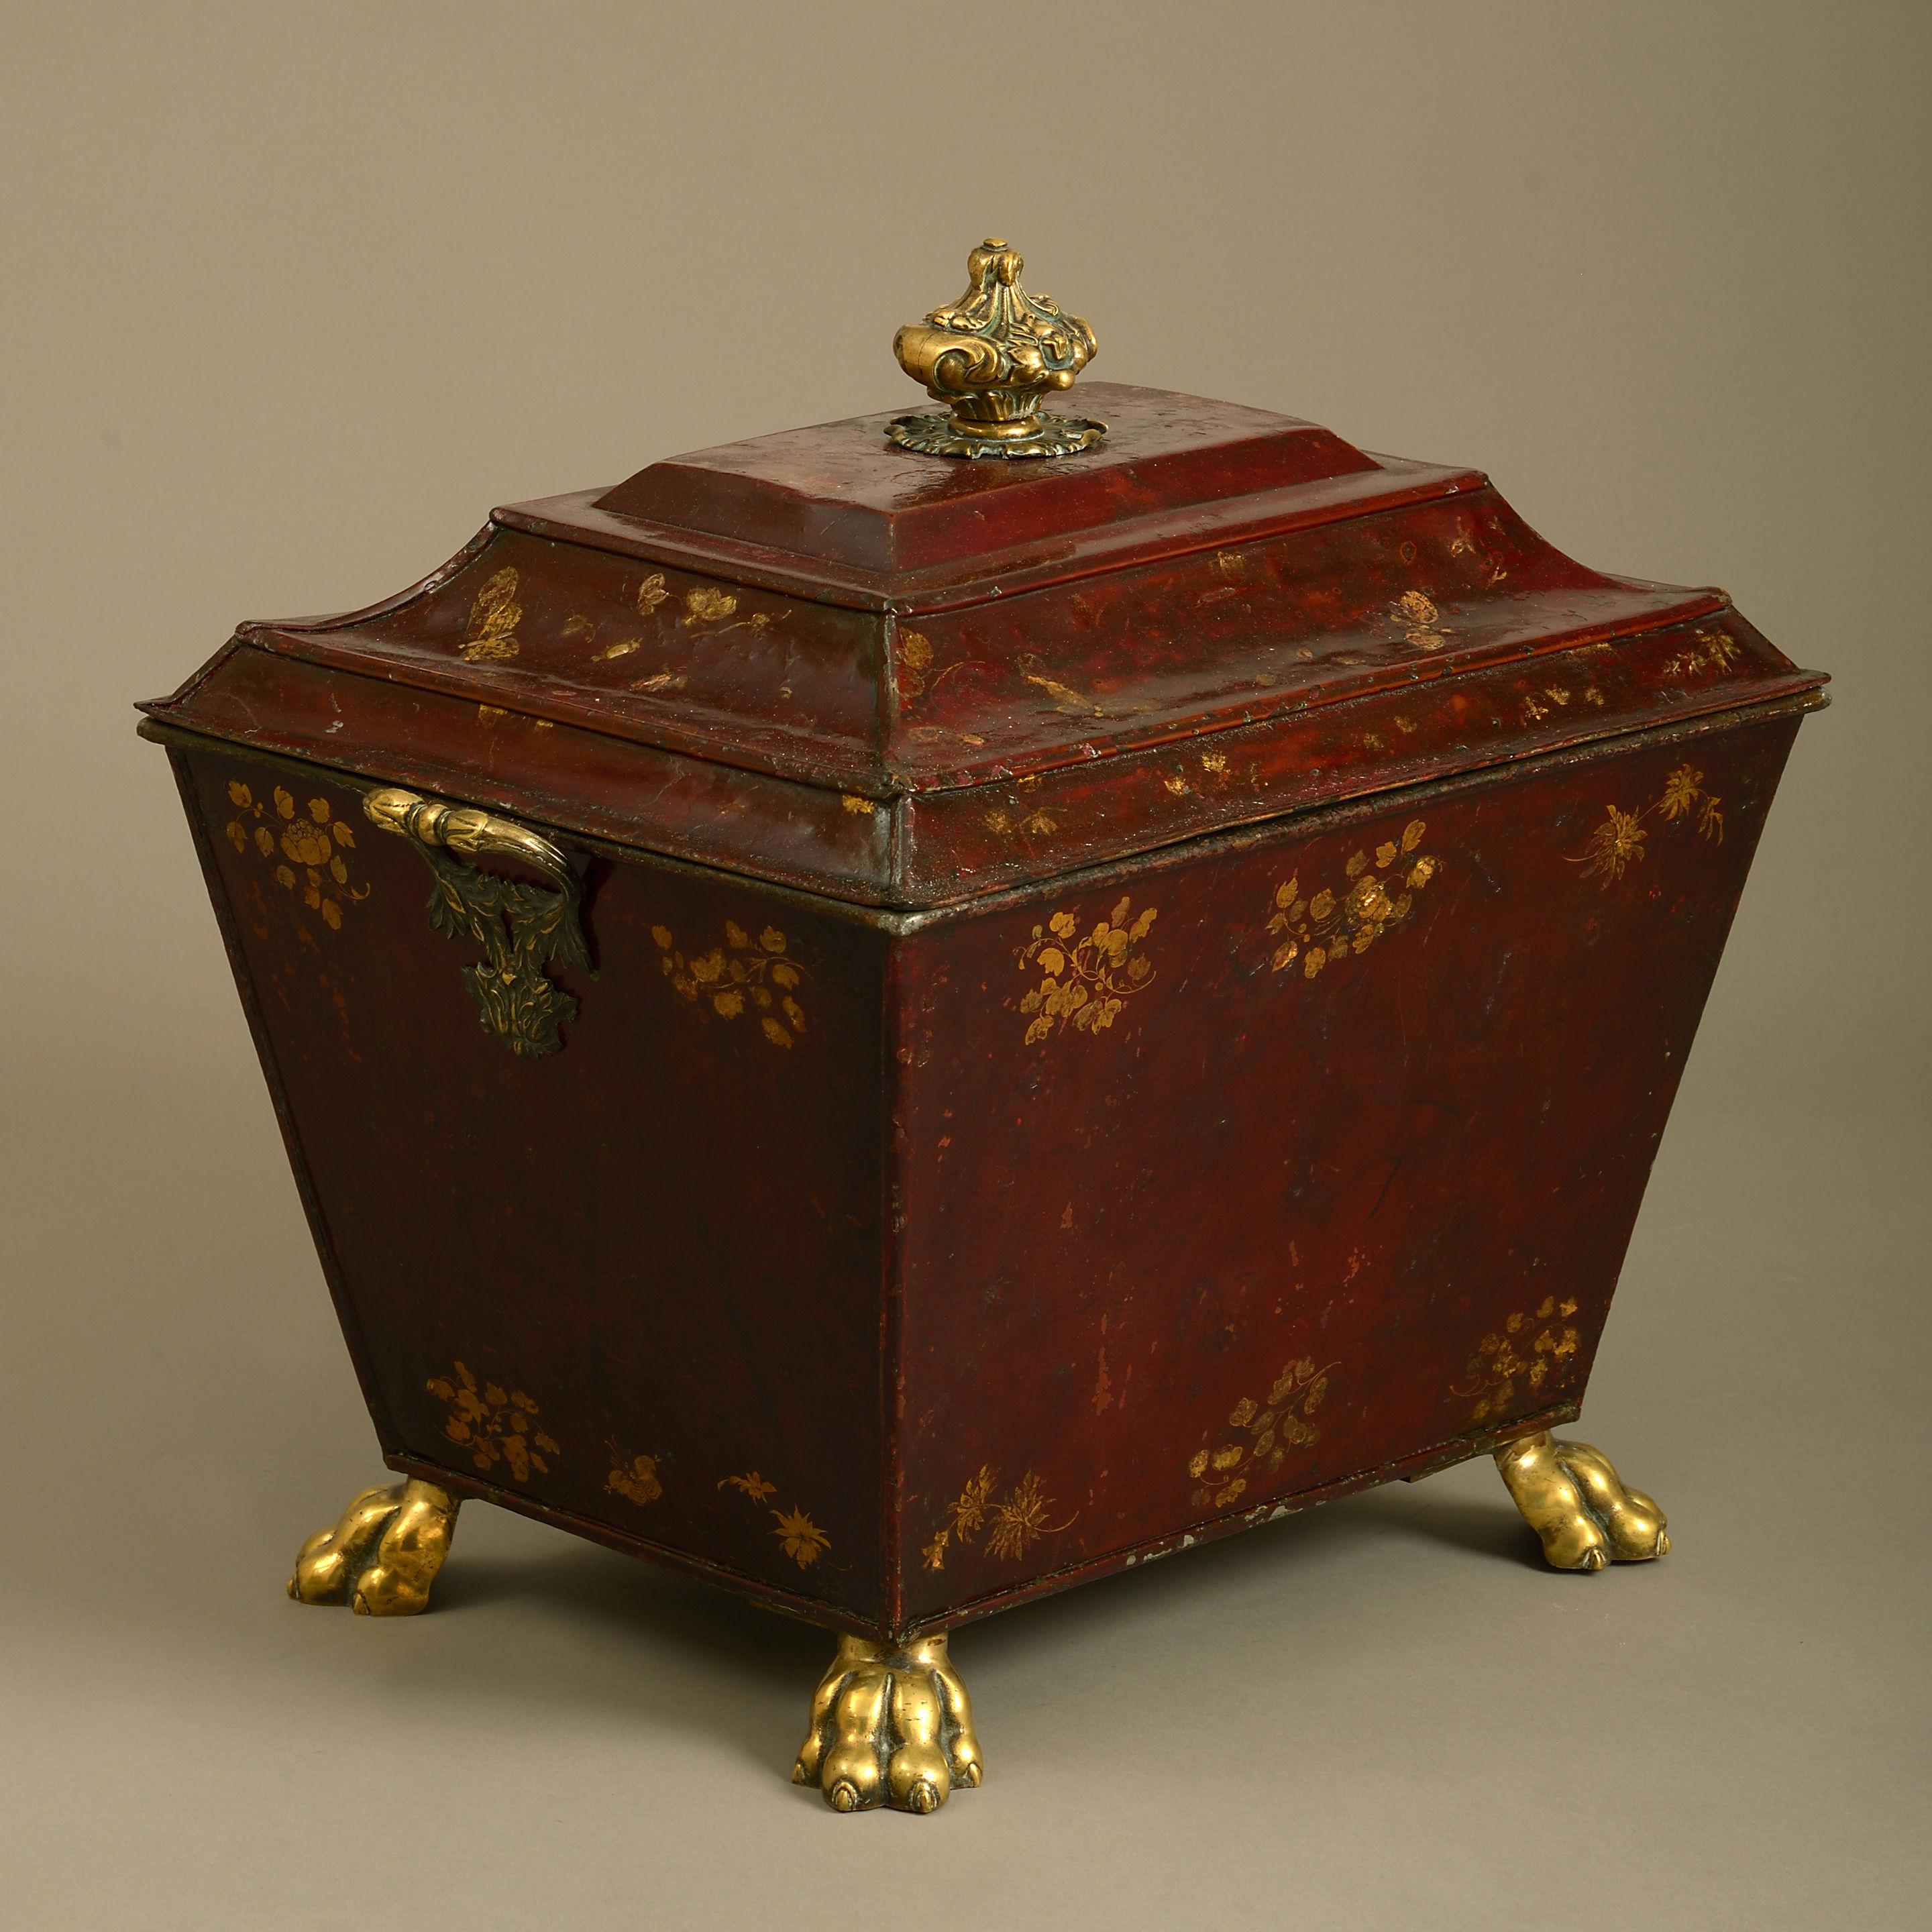 A fine early 19th century Regency period tole coal bin decorated throughout with gilded butterflies, flowers and foliage upon a dark red ground, the lid having a finely cast knop, the body with carrying handles and lions paw feet of the same.